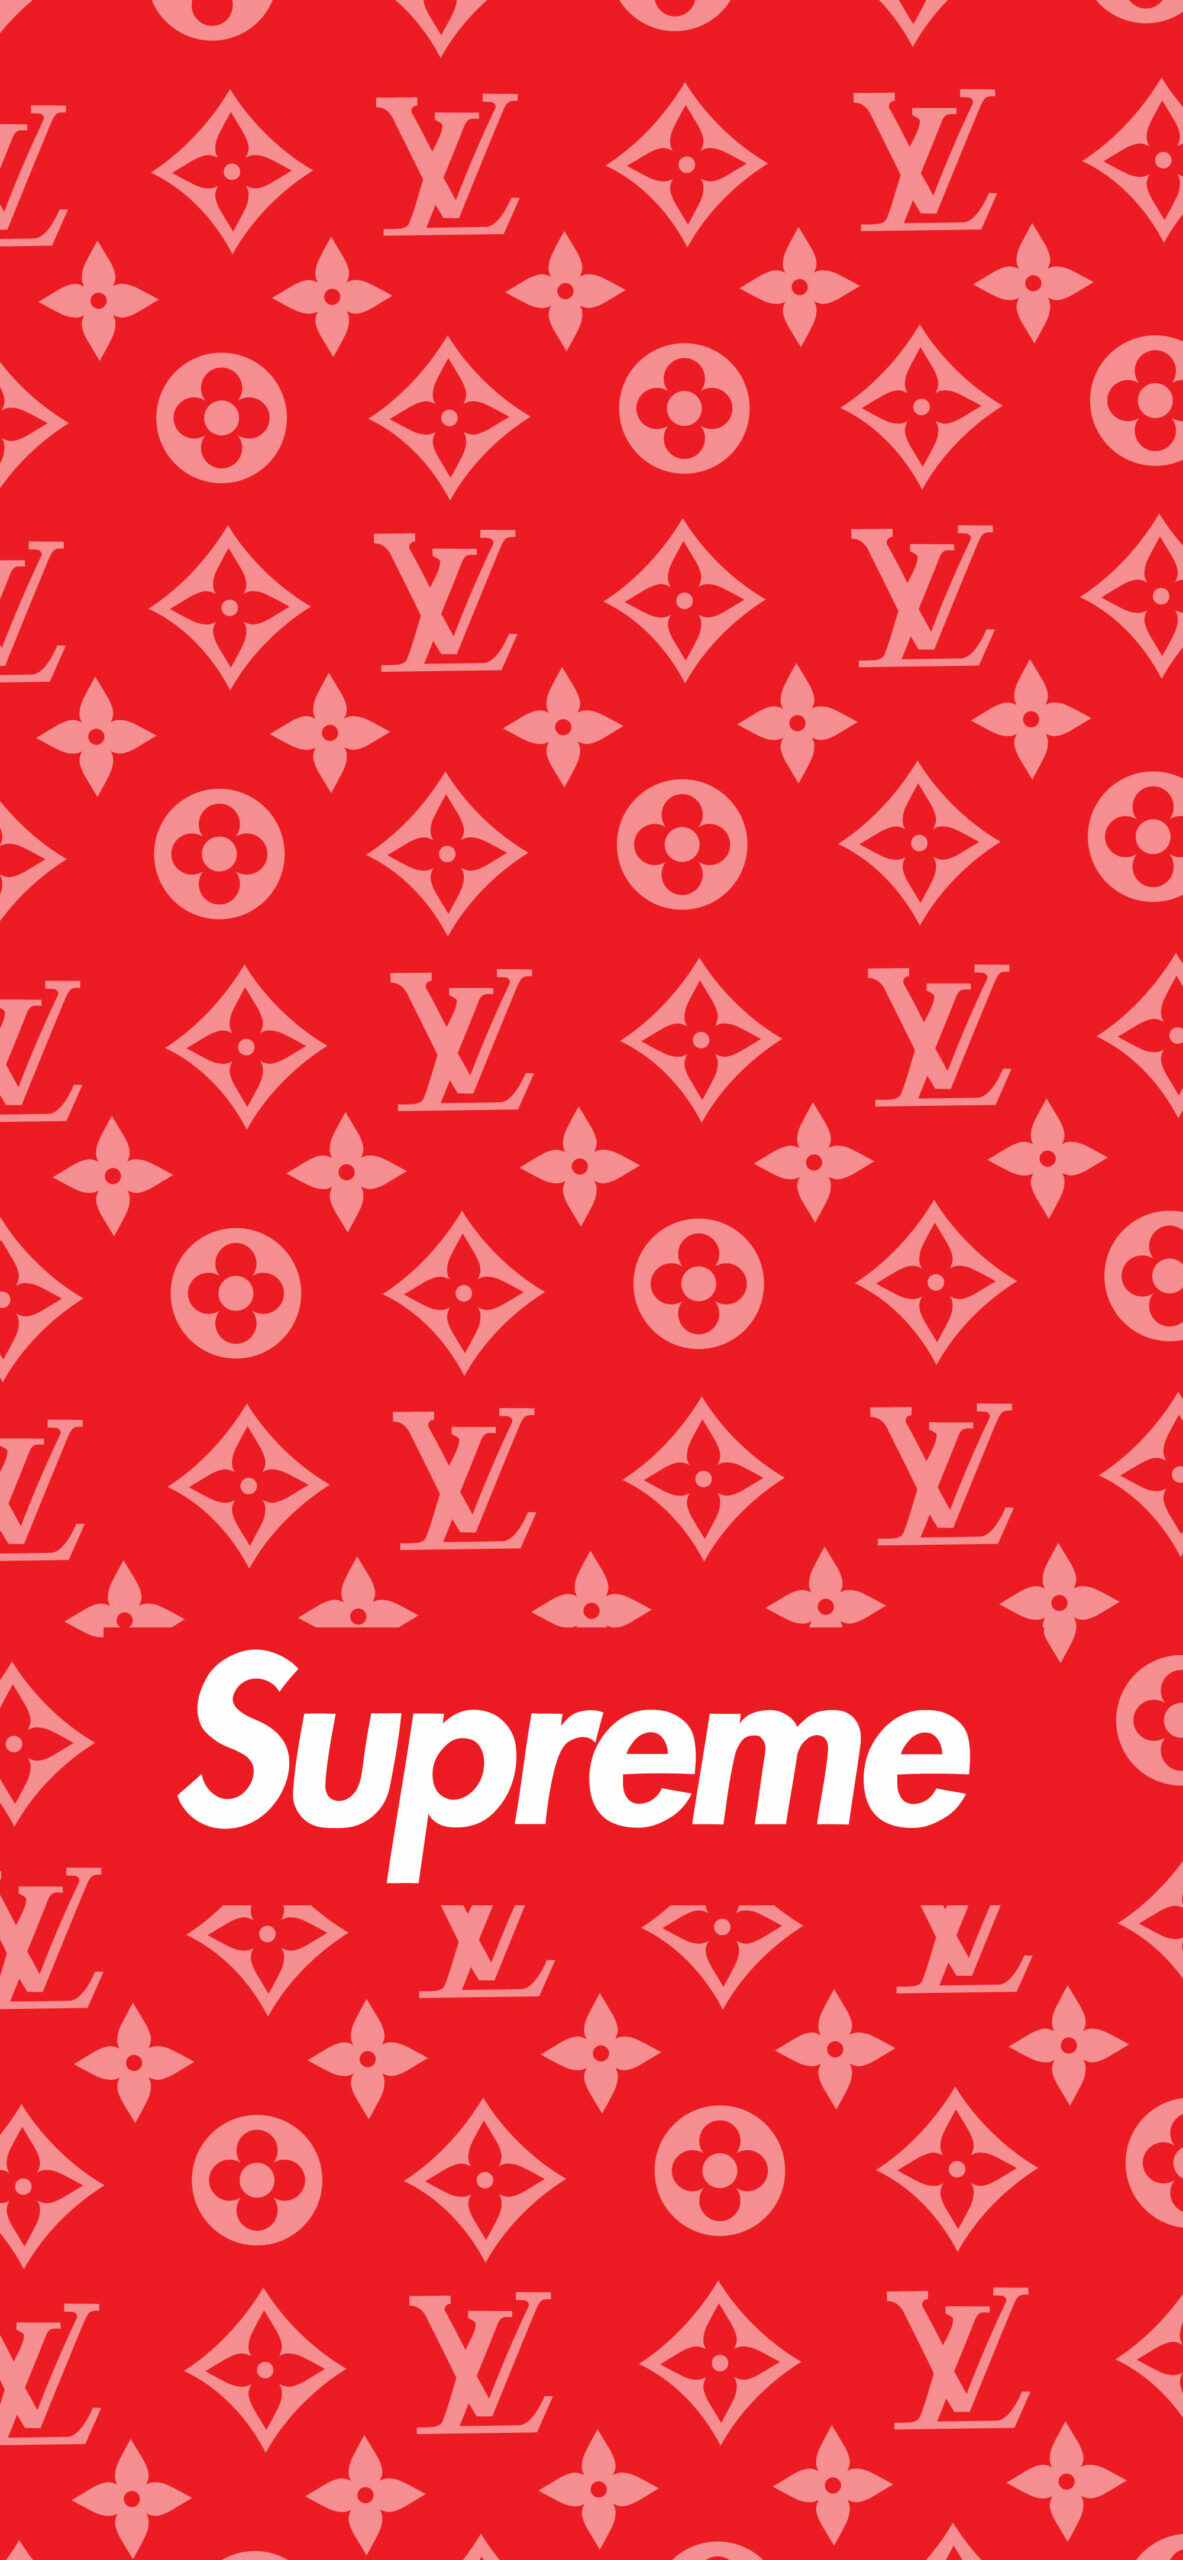 Louis Vuitton: Supreme, Has a loyal customer base and a strong brand identity. 1190x2560 HD Wallpaper.